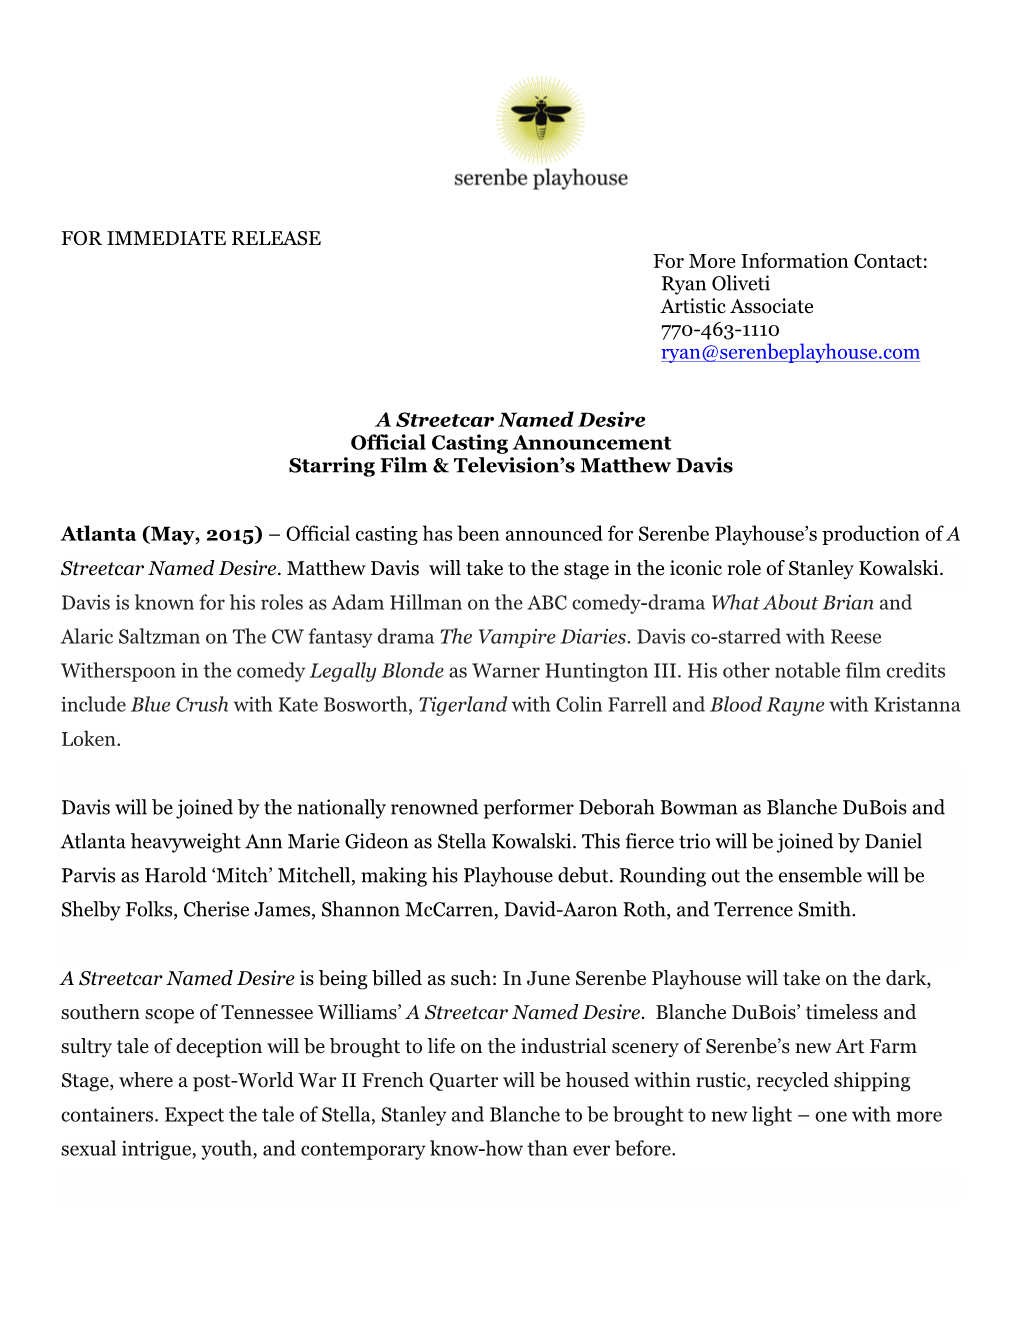 A Streetcar Named Desire Official Casting Announcement Starring Film & Television’S Matthew Davis